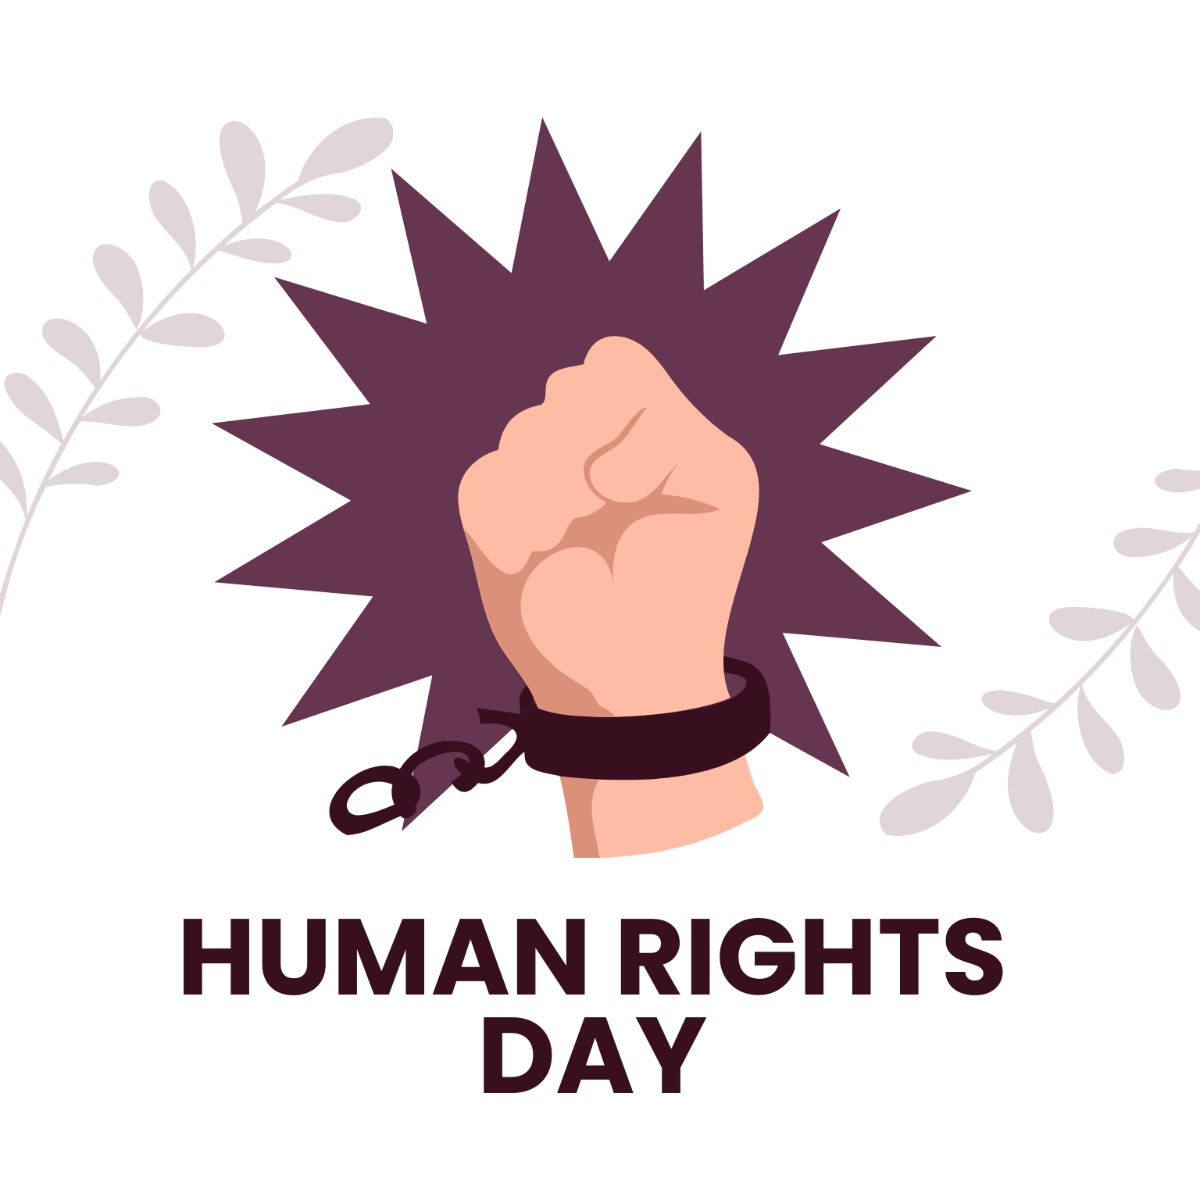 Human Rights Day Illustration Template